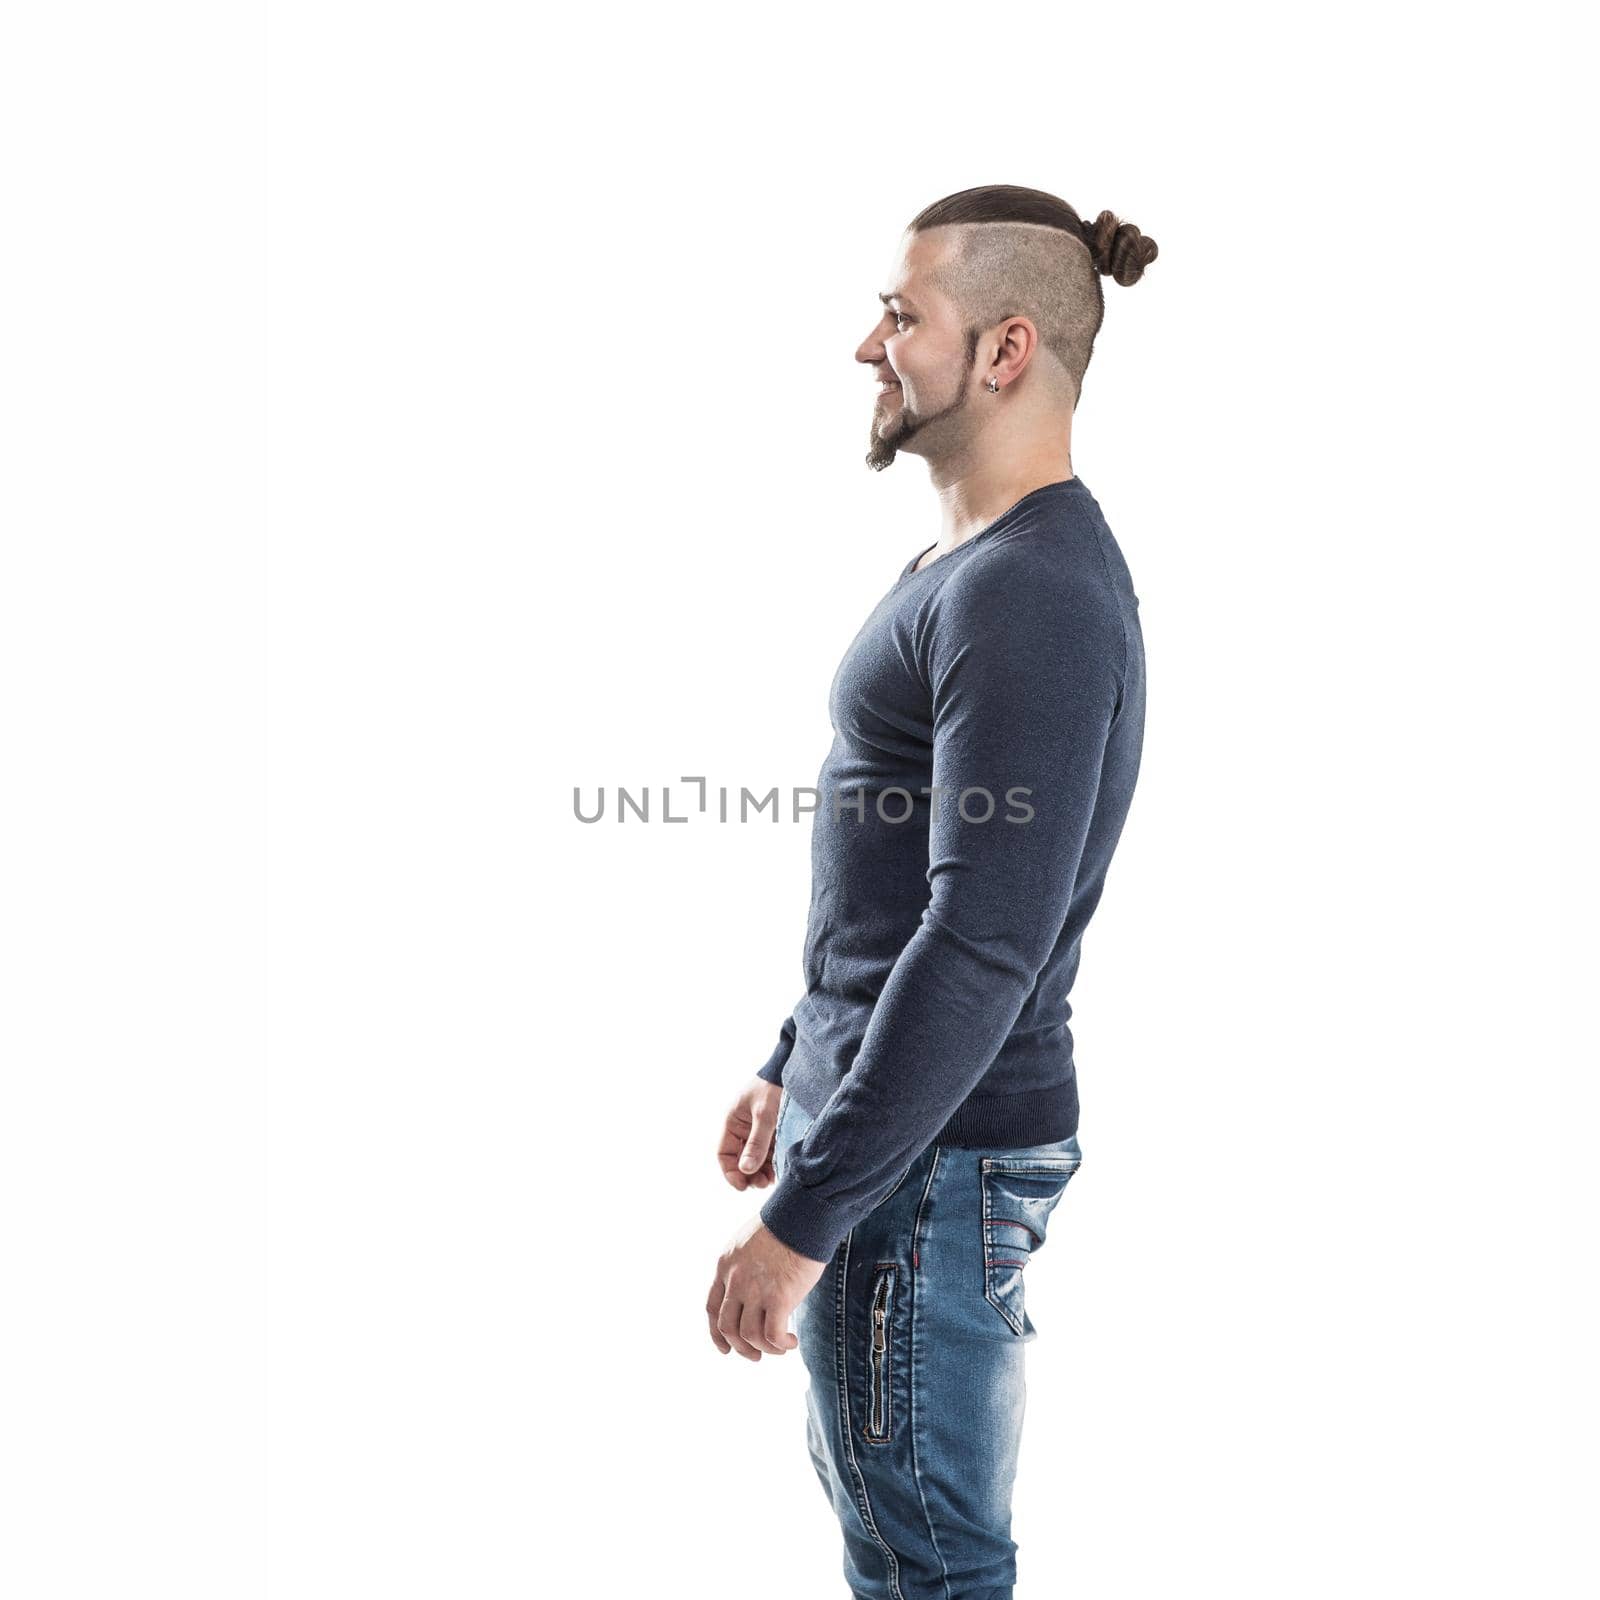 side view - the sports guy - a bodybuilder in jeans and a t-shirt on a light background . the photo has a empty space for your text